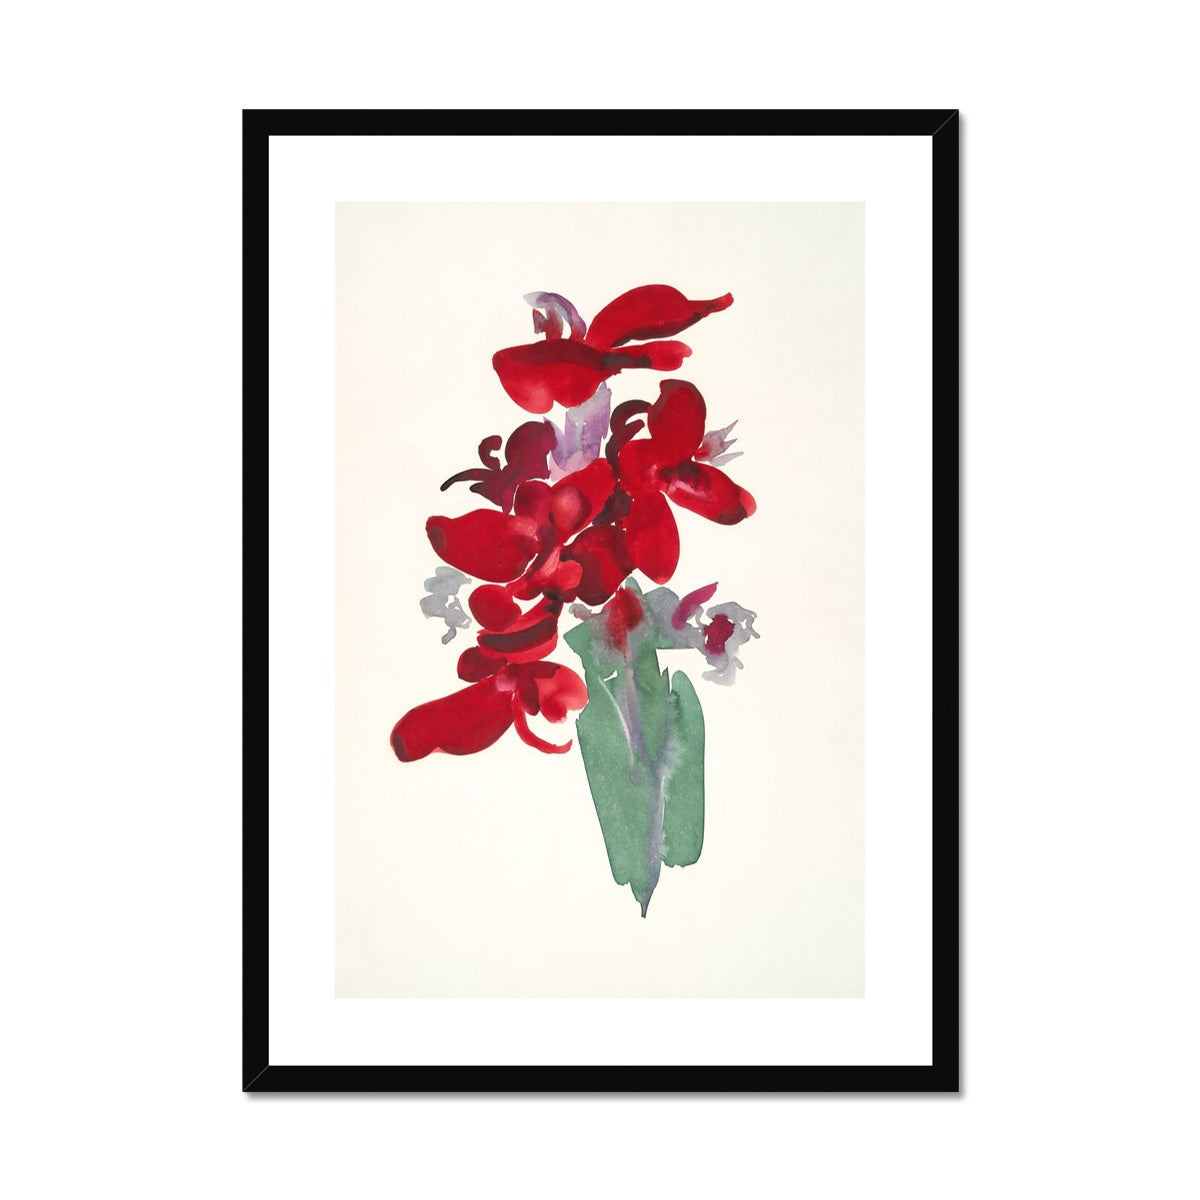 'Red Canna'  by Georgia O’Keeffe. Open Edition Fine Art Print. Framed Open Edition Fine Art Print. Historic Art